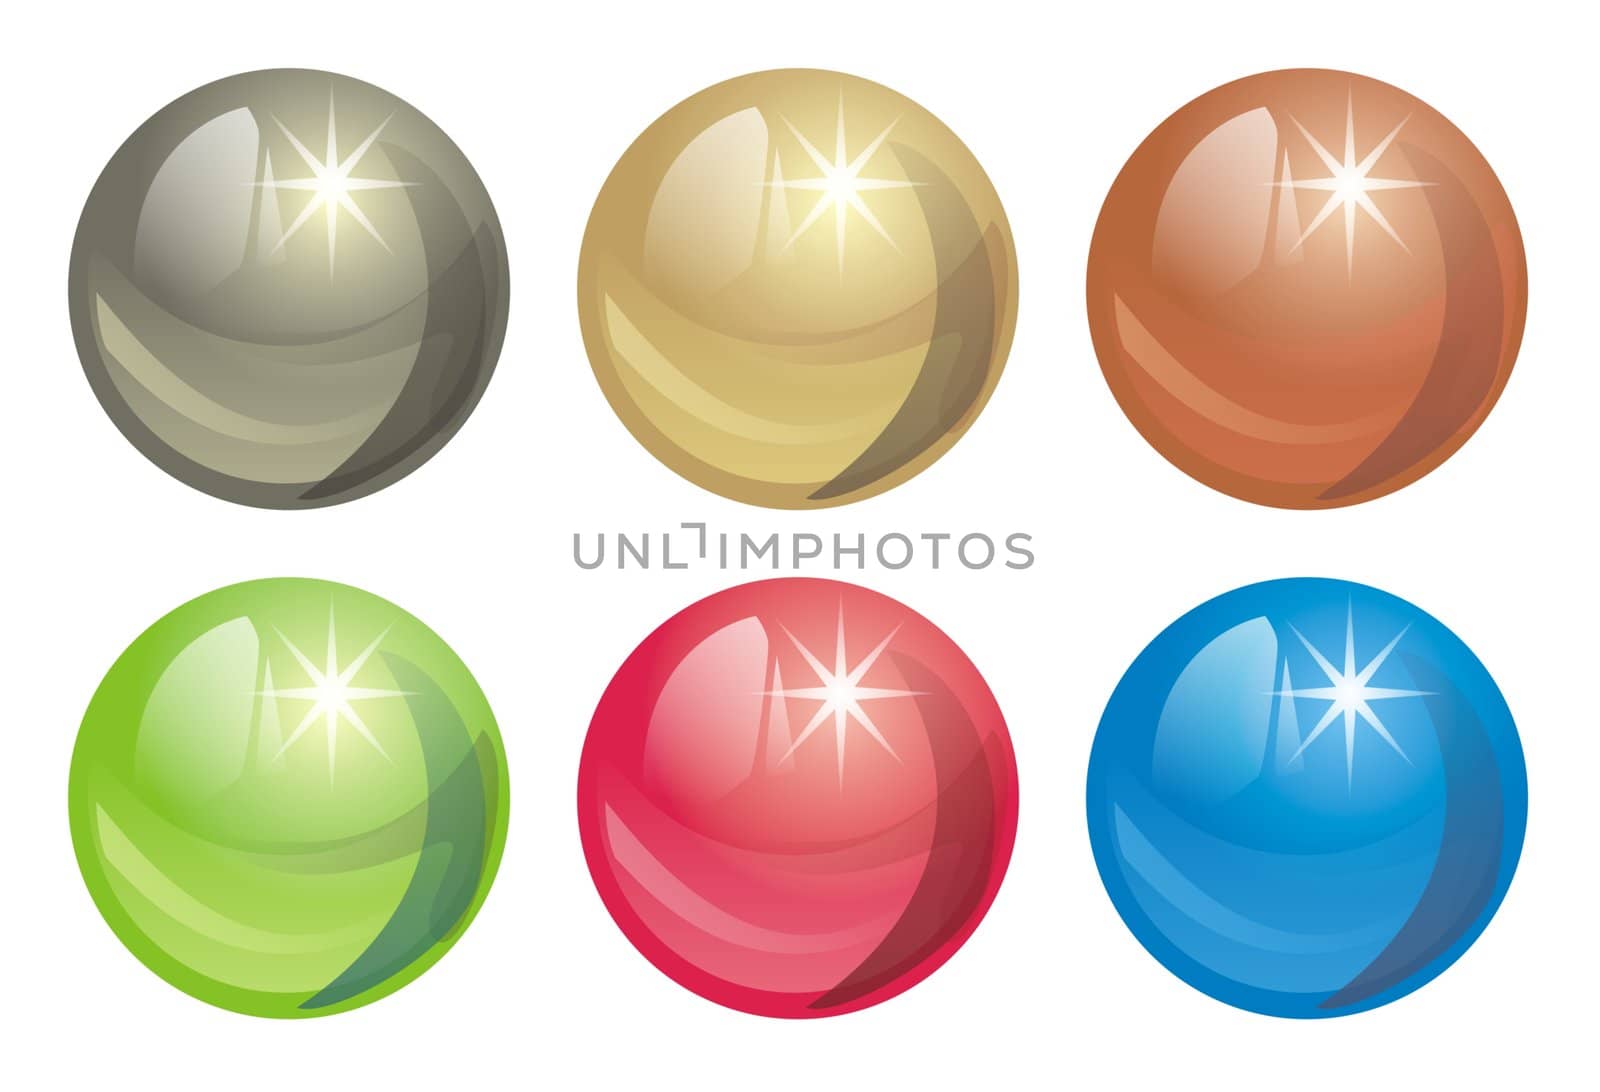 Decorative spheres of different colors by Serp